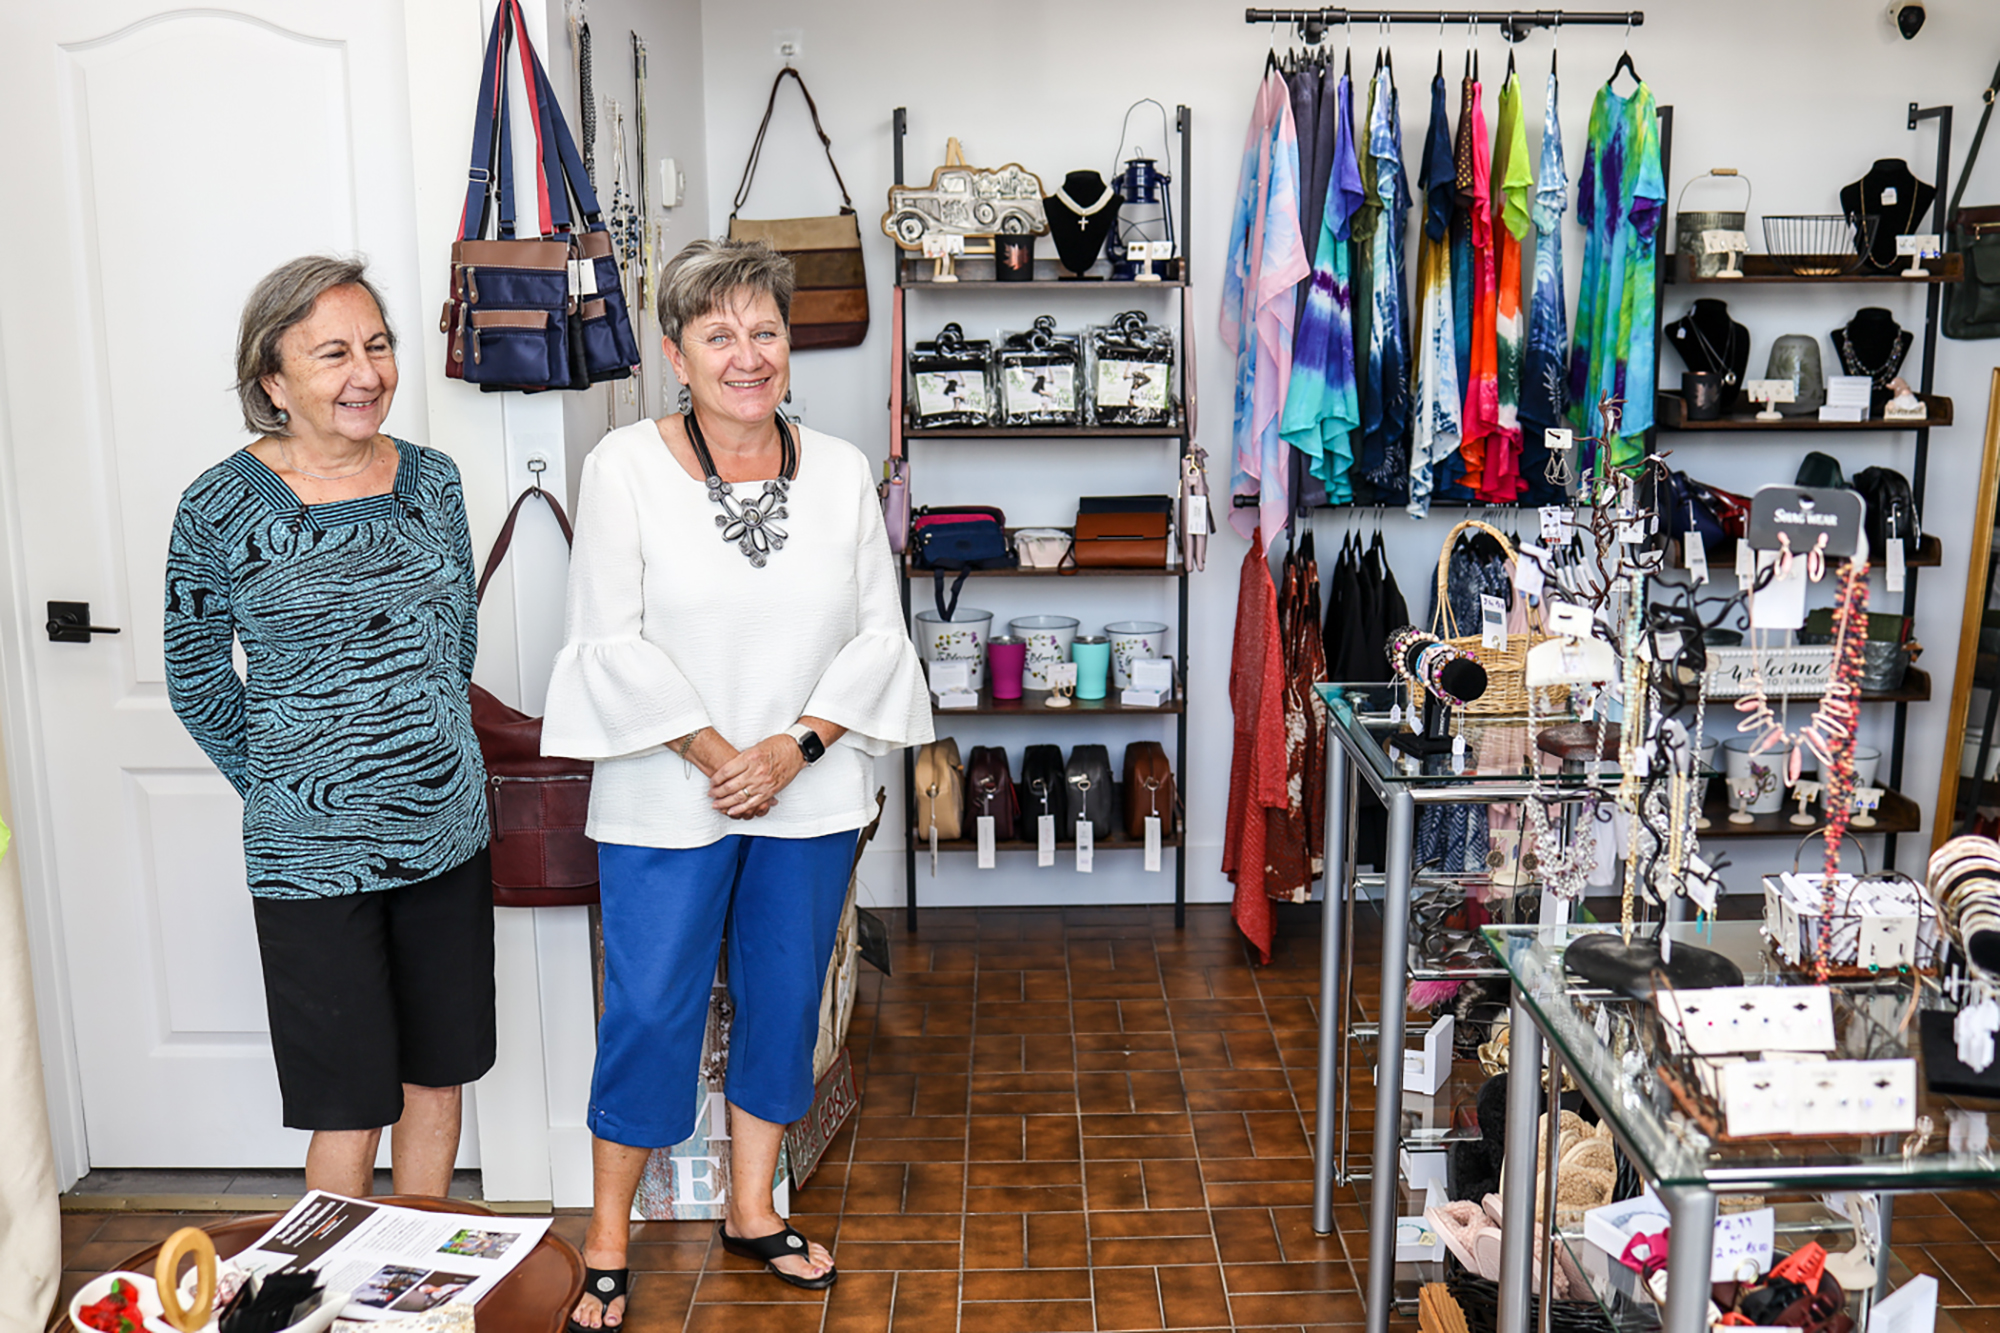 Earlene and her sister Helen at the new not-for-profit gift store